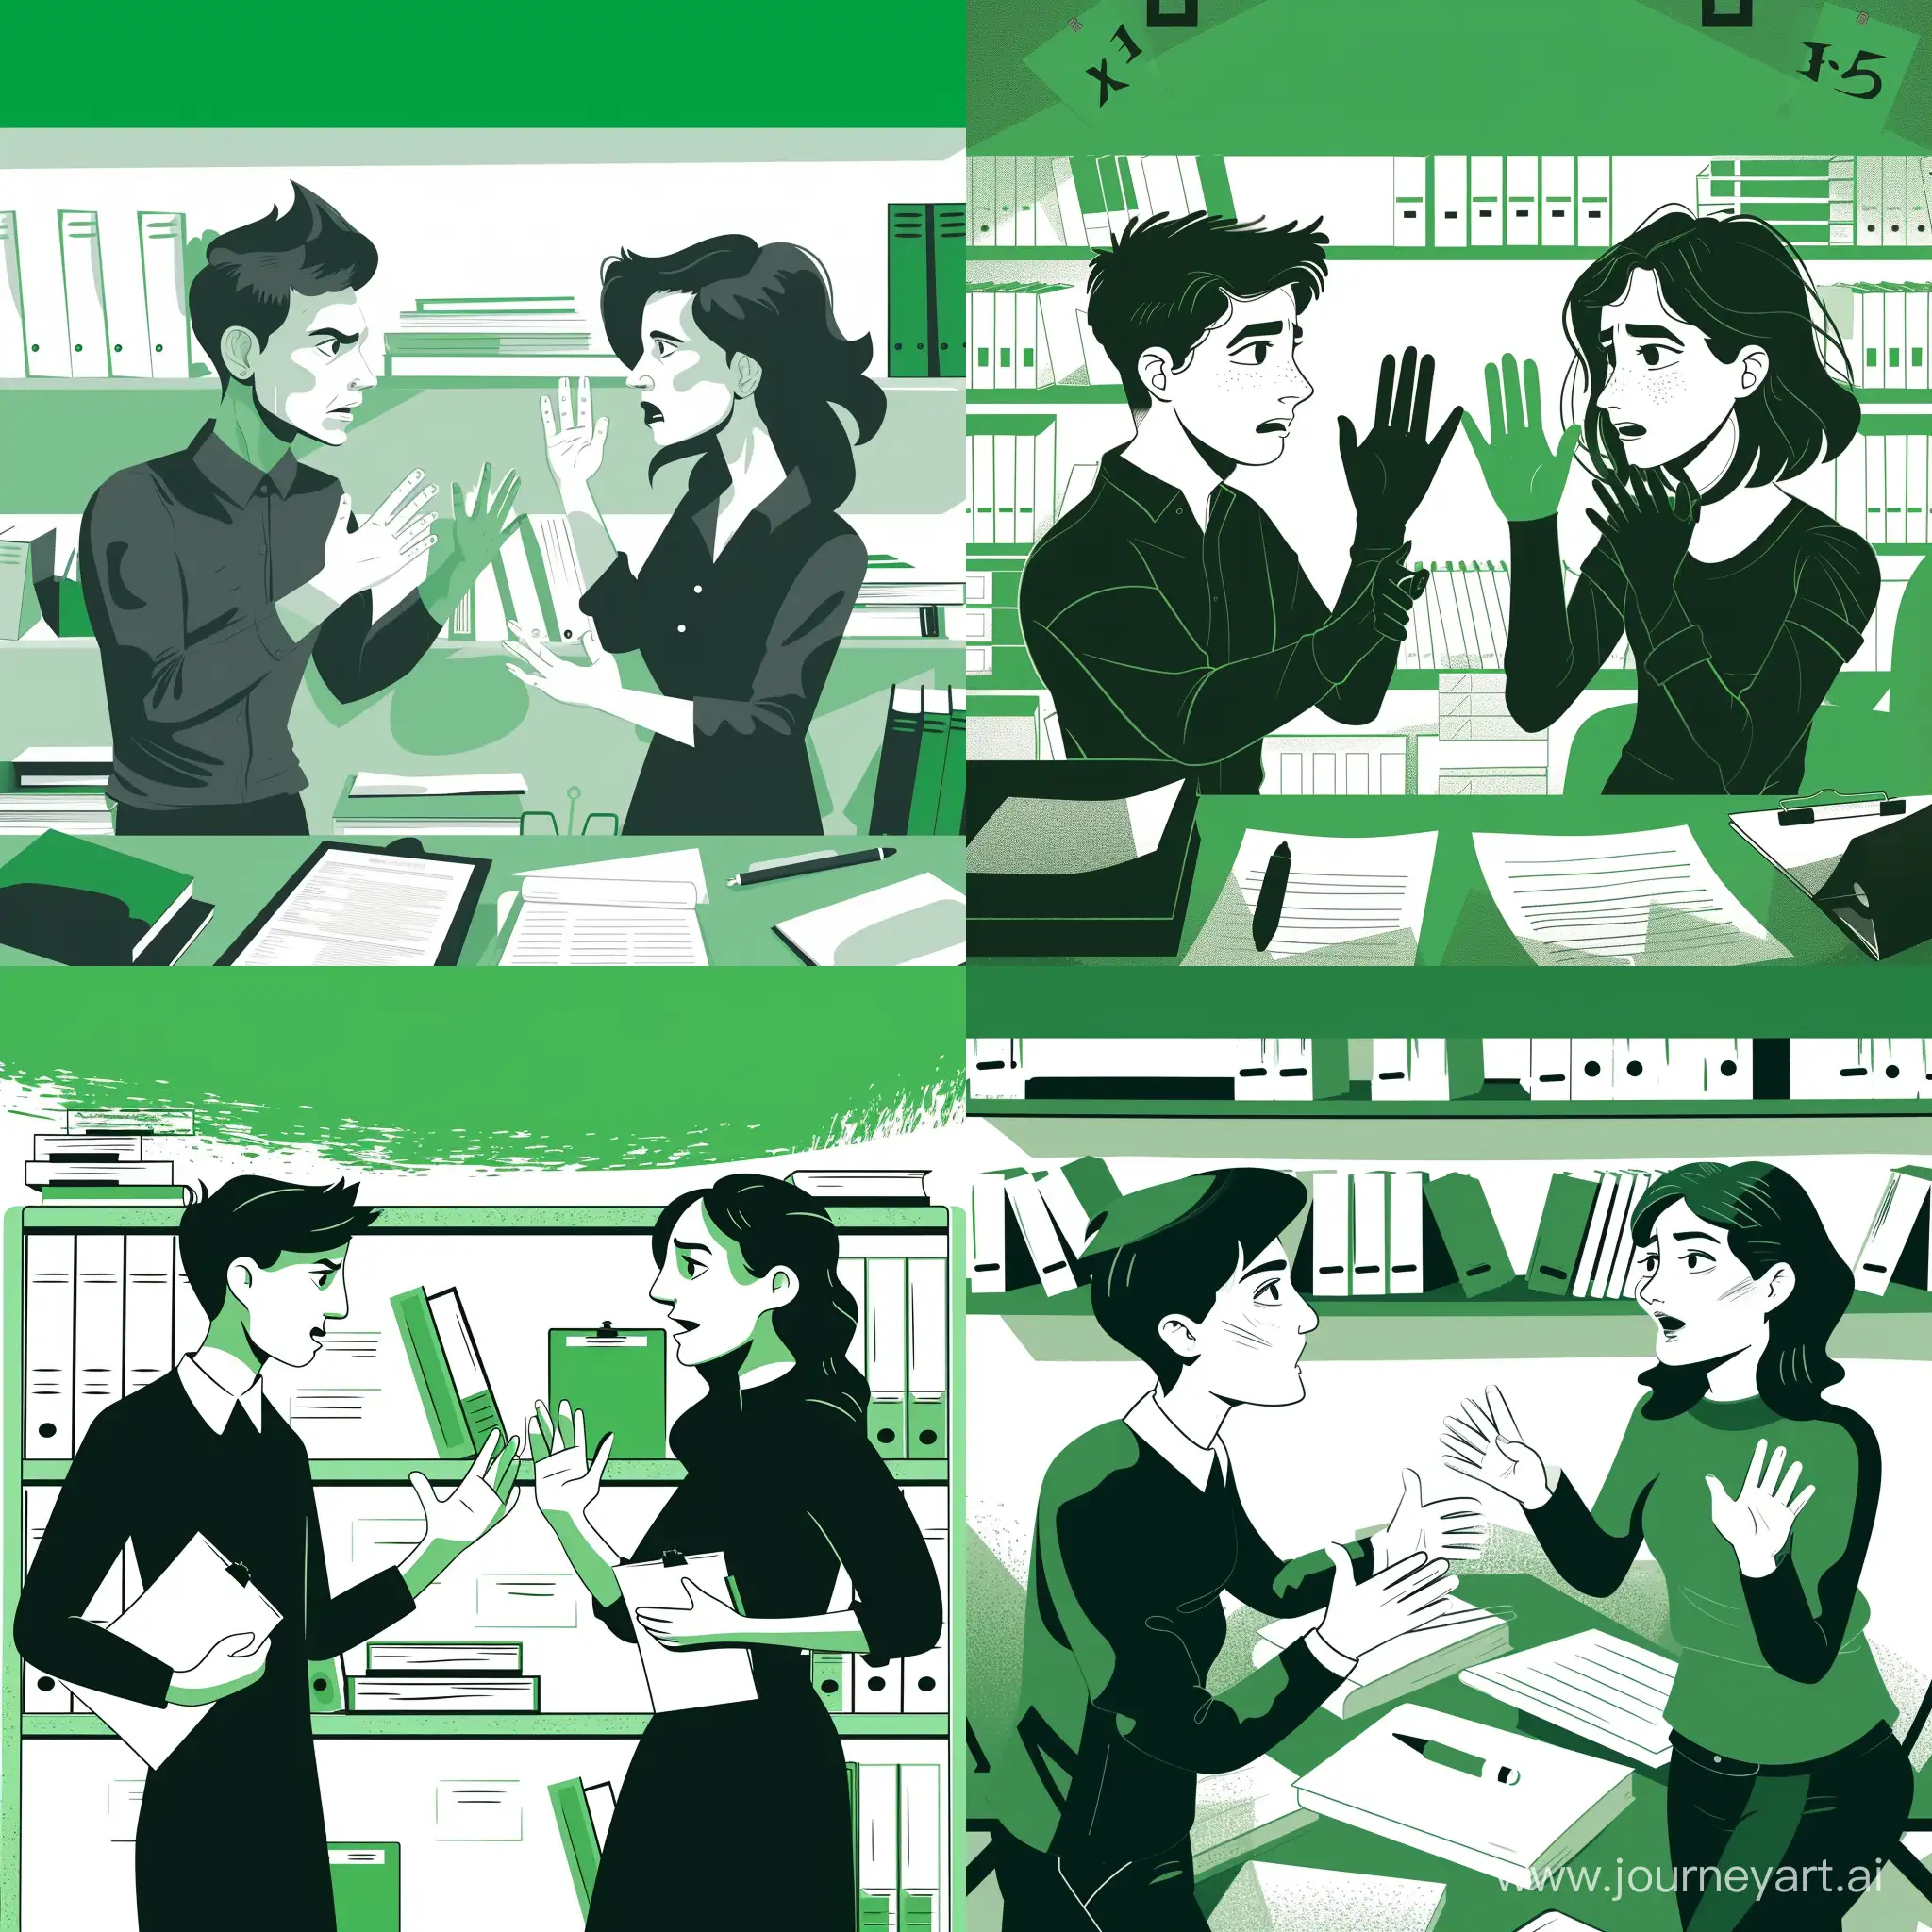 image in green, white and black colors of the x5 group russia retail market, less bright colors, which depicts a discussion area, books and stationery arranged, cartoon simple art graphics of characters, Full HD, two young people arguing - a man and a woman, abstract faces , argument, emotional debate on a provoking topic, monochromatic space in the top pictures, a simple background in white-green-black tones, an arguing man and woman are in a room intended for debates and polemics on debatable topics, there is a business environment around, the light is dim in a combination of white-green-black shades, the colors are dim but expressive, a man and a woman are discussing some topic. the character design is beautiful, the contours of the body and face are clear and well drawn, there are 5 fingers on each hand, the fingers are drawn well, the character design is unrealistic, but the body proportions are similar to real human ones, the characters are beautiful and well detailed, both are arguing and standing opposite each other, in their hands they have writing paper or a notepad with a pen, they argue and write down each other’s arguments. around them are shelves with documents. there are no inscriptions on documents or any objects around, the background is calm, there should be a solid green space at the top of the image, there should be no patterns or interference, no blurriness or unclear outlines, the debaters will present the project to their colleagues